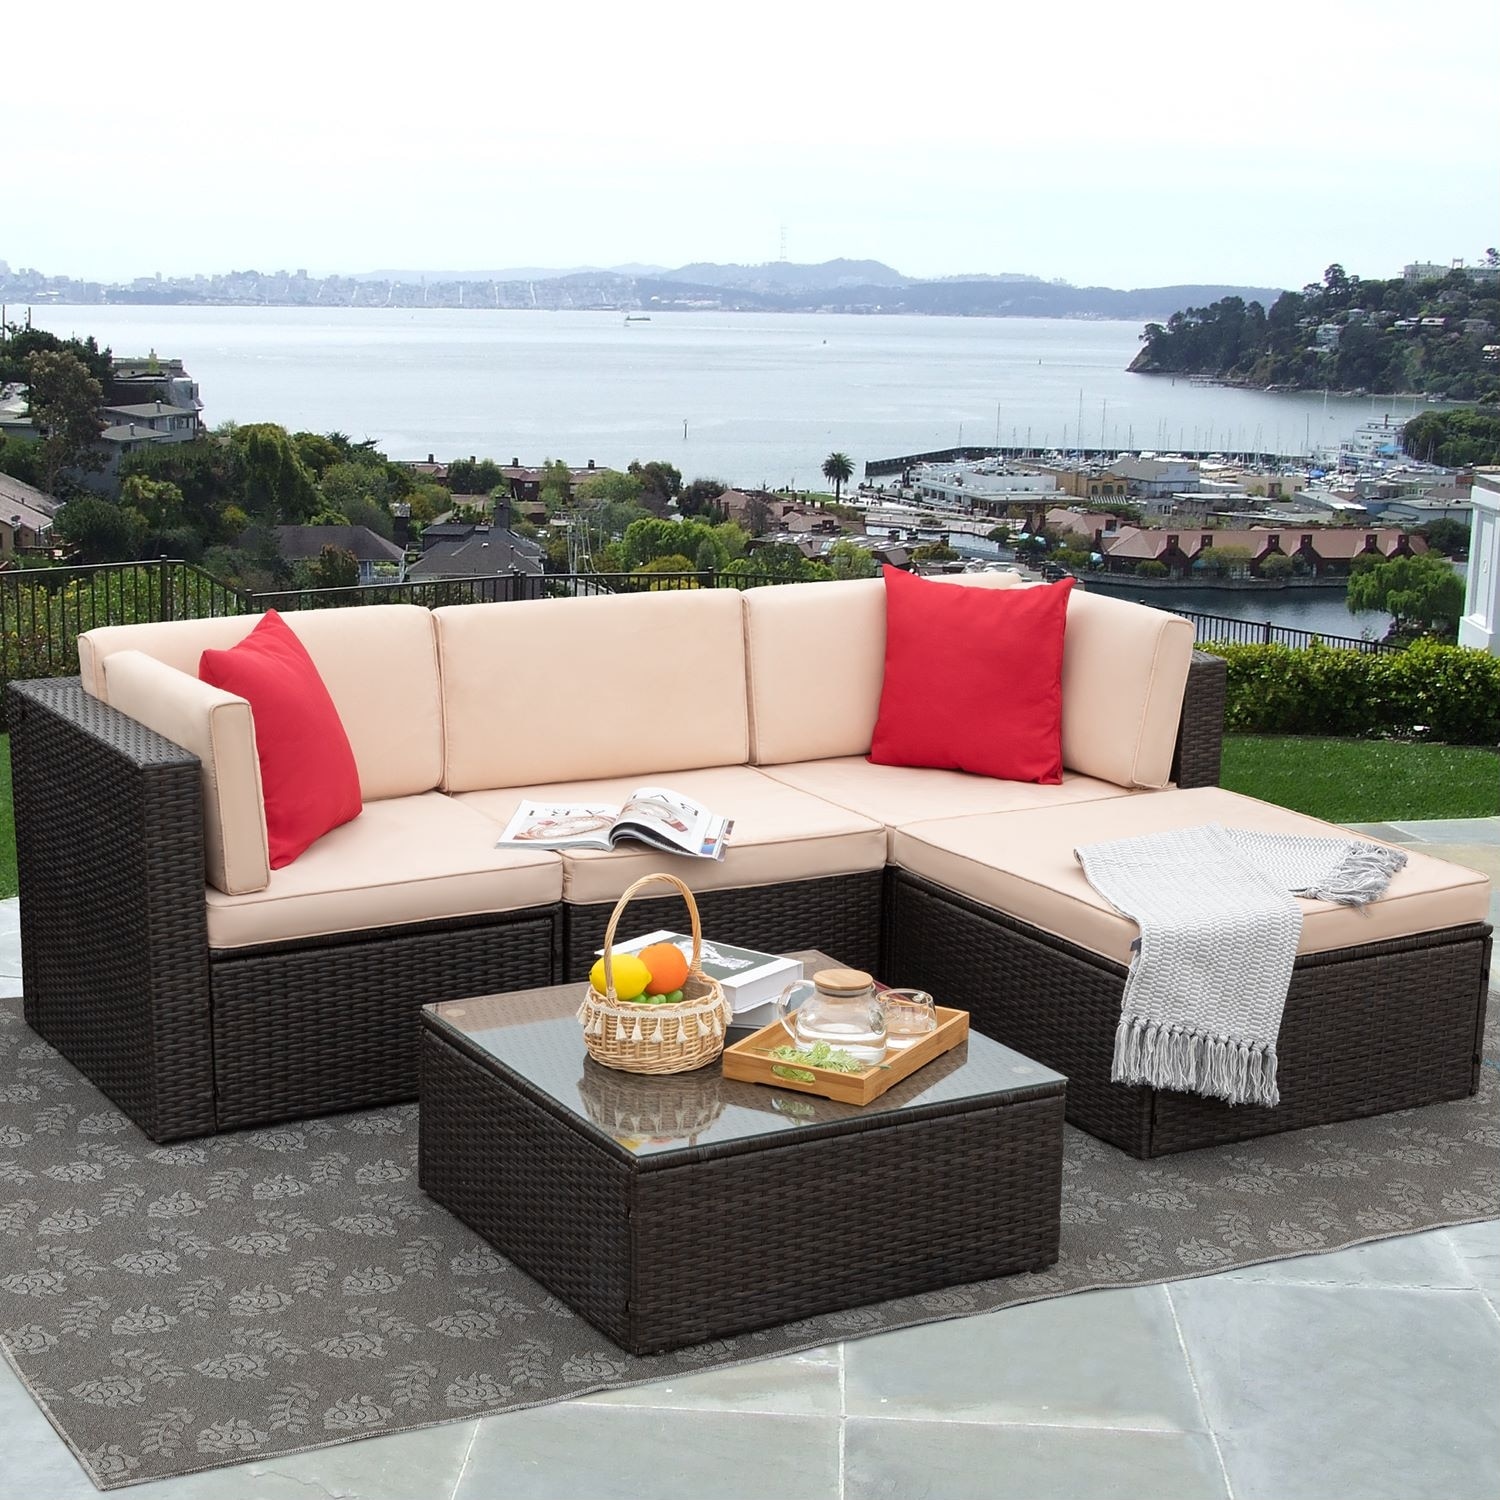 Red Devoko Patio Furniture Sets 6 Pieces Outdoor Sectional Rattan Sofa Manual Weaving Wicker Patio Conversation Set with Glass Table and Cushion